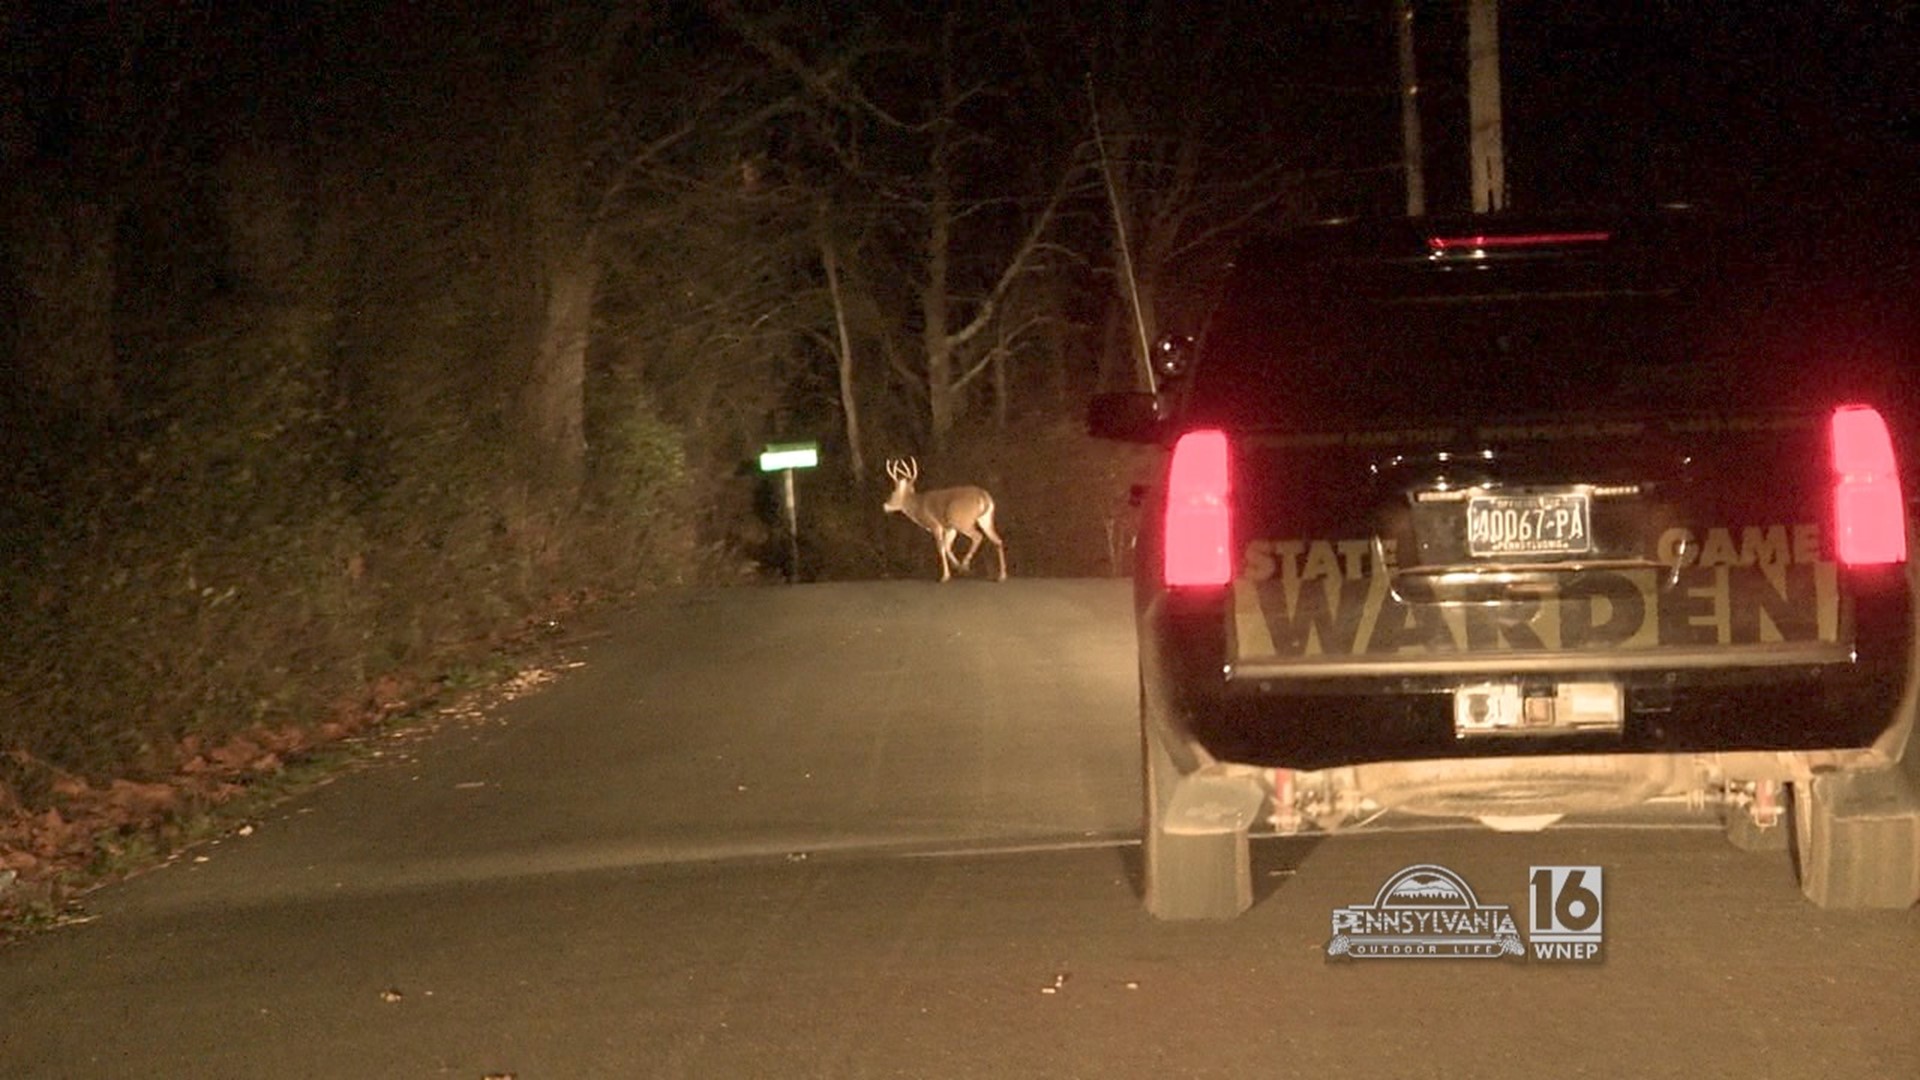 The bucks come out at night.